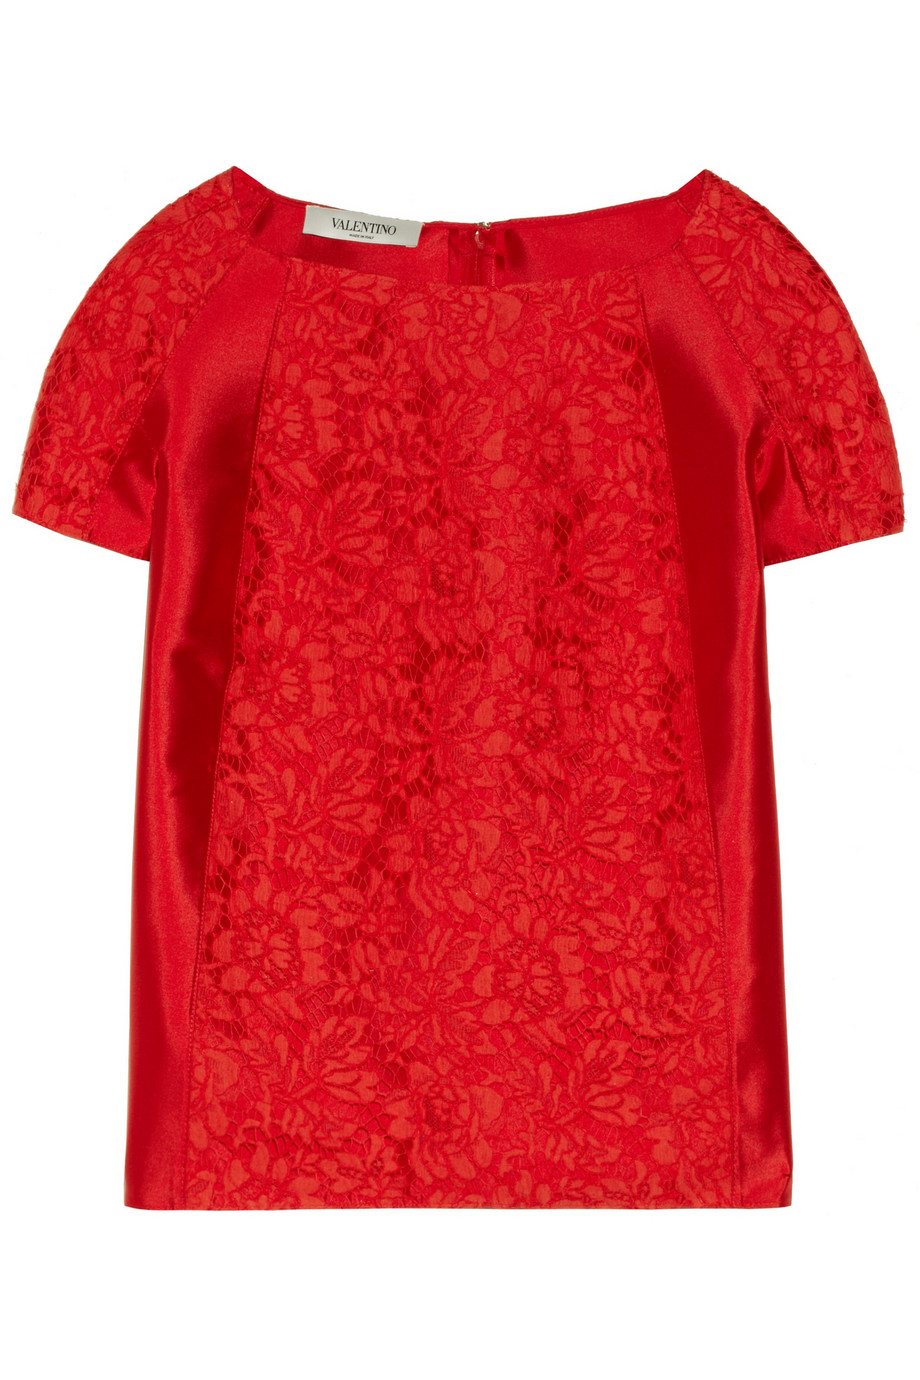 Valentino Cotton Blend Lace and Silk Twill Shirt in Red | Lyst